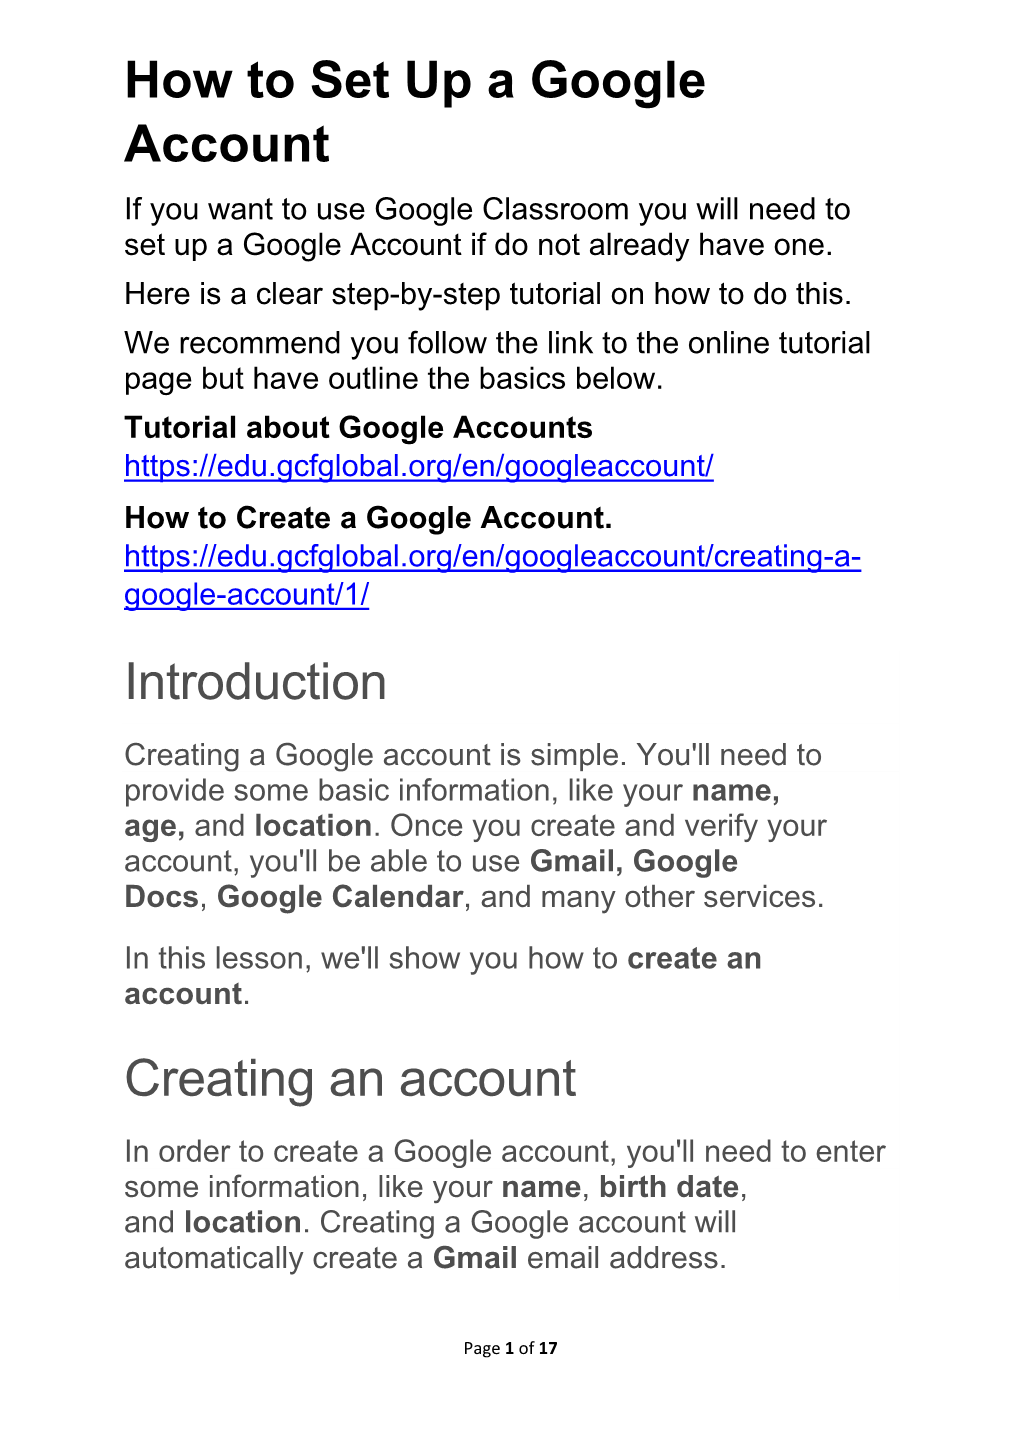 How to Set up a Google Account If You Want to Use Google Classroom You Will Need to Set up a Google Account If Do Not Already Have One